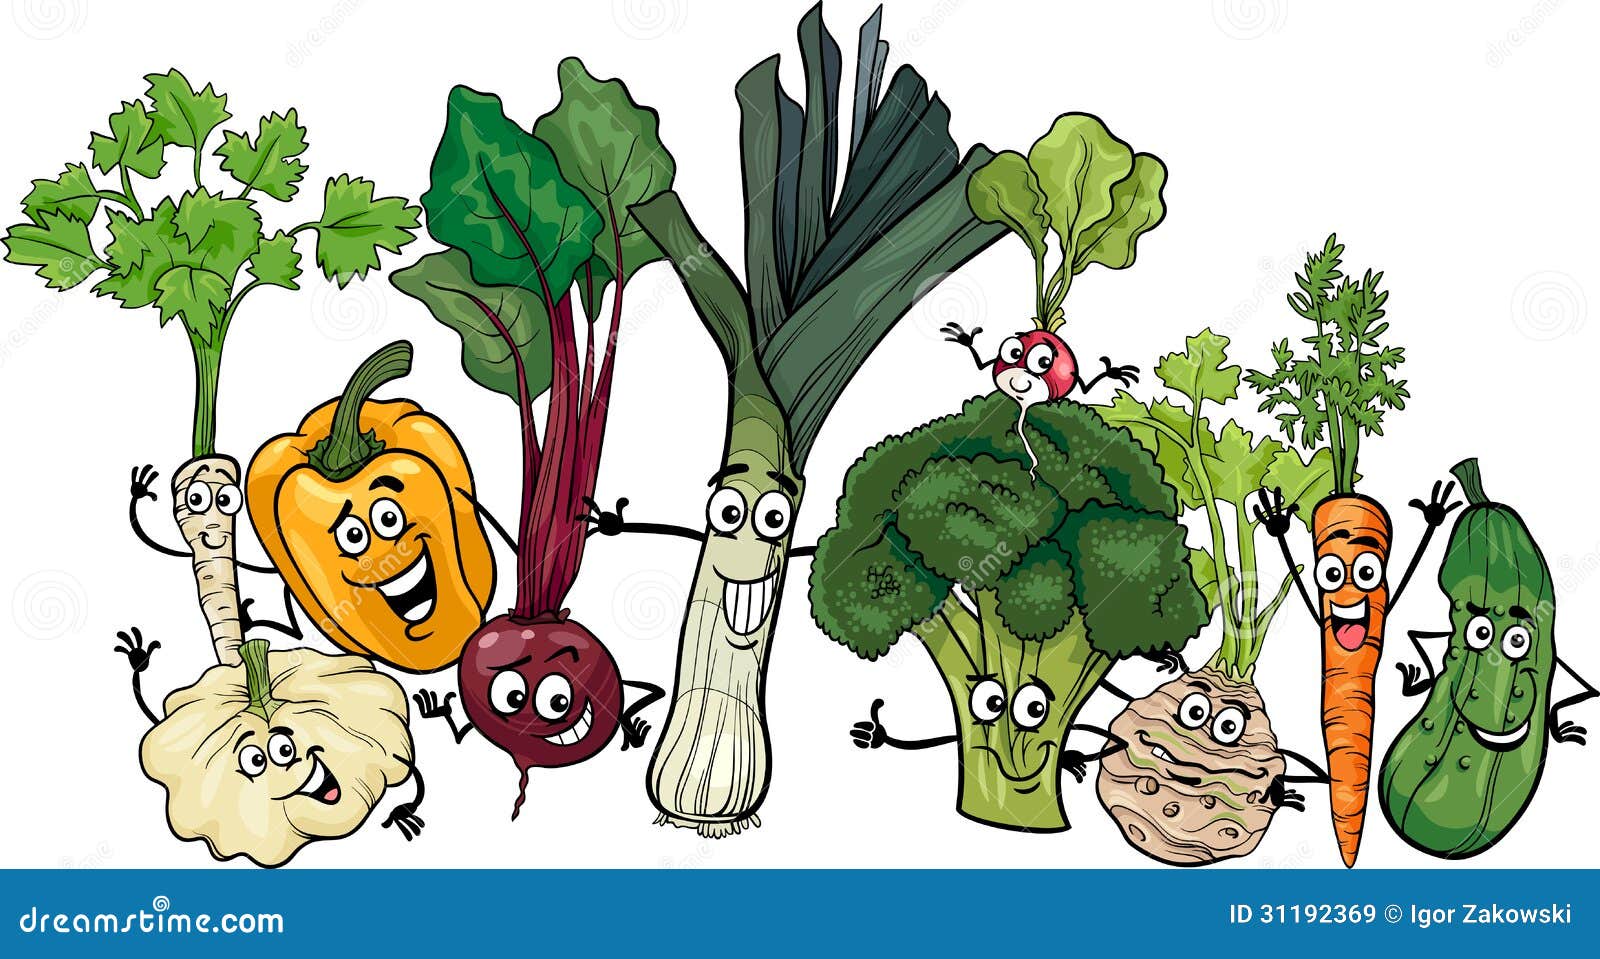 Funny Vegetables Group Cartoon Illustration Royalty Free Stock Images